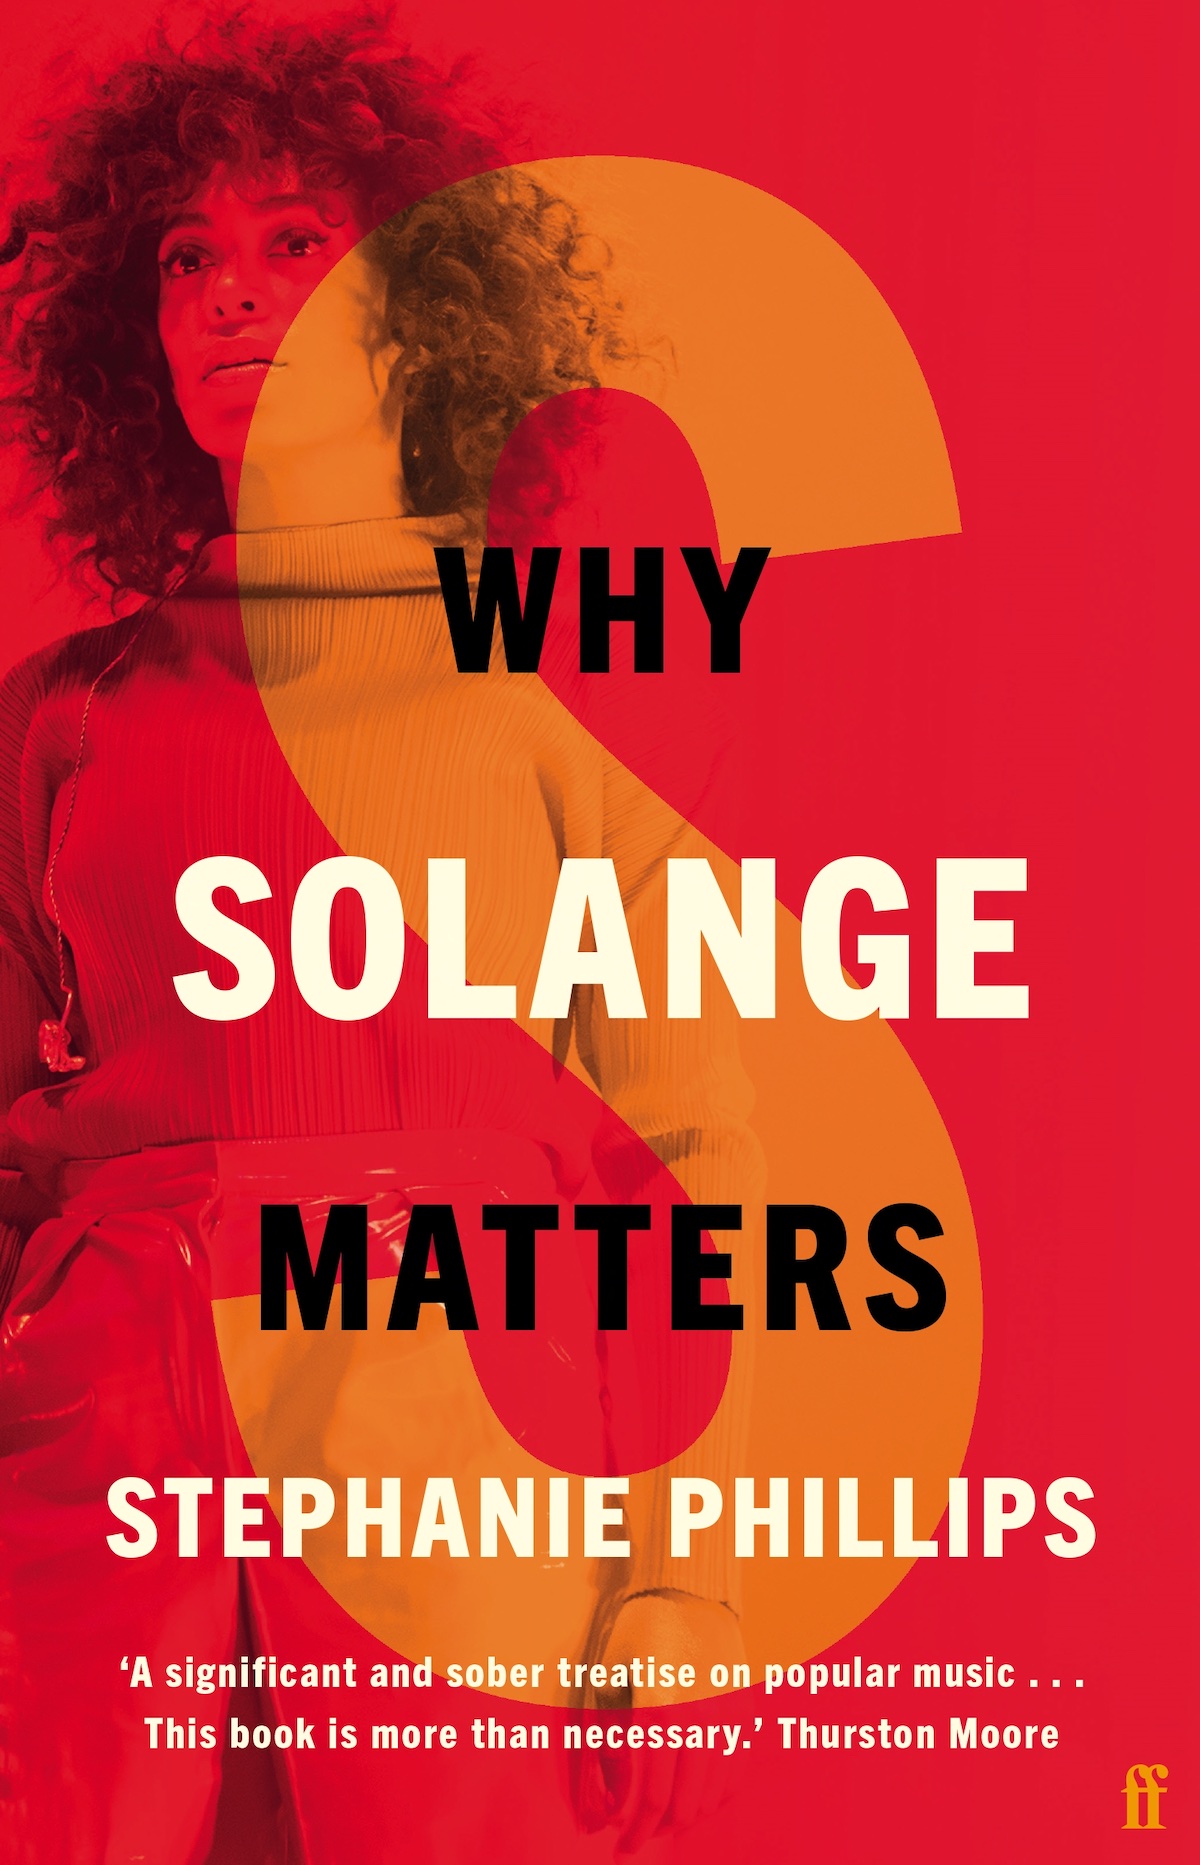 Why Solange Matters (alternate book cover)